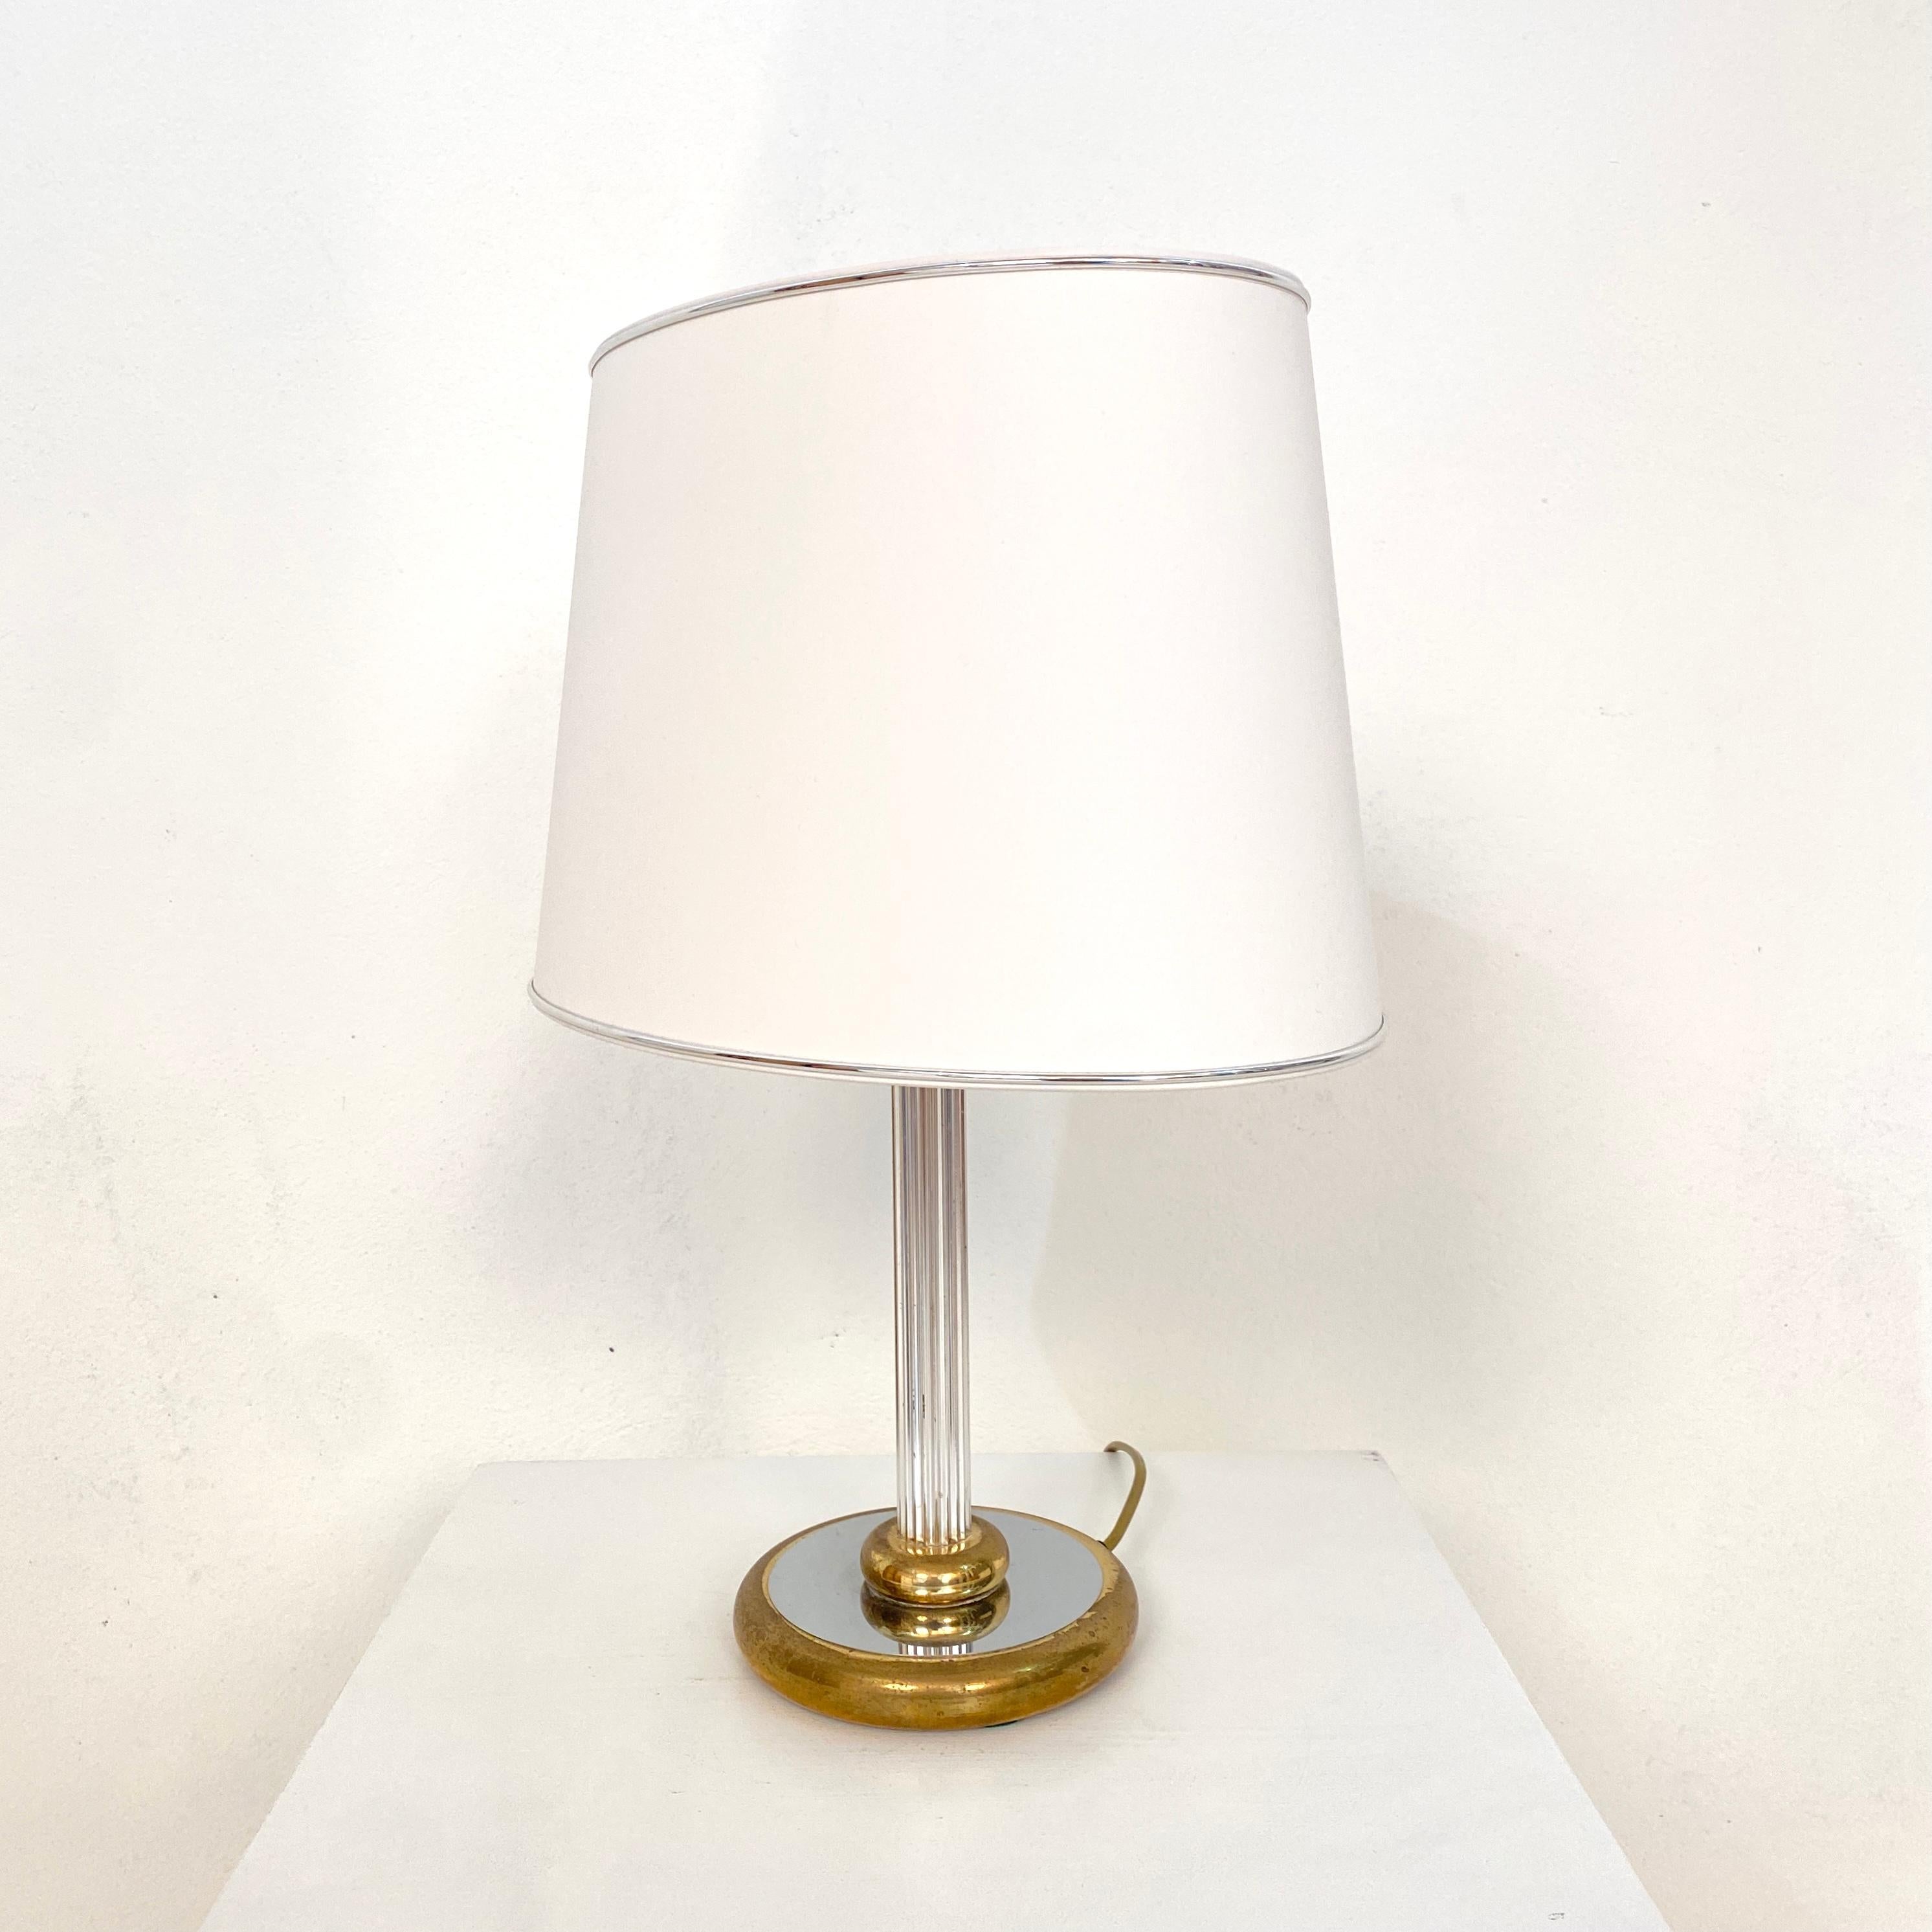 Late 20th Century Midcentury German Table Lamp by Aro-Leuchte in Chrome and Brass, circa 1970 For Sale